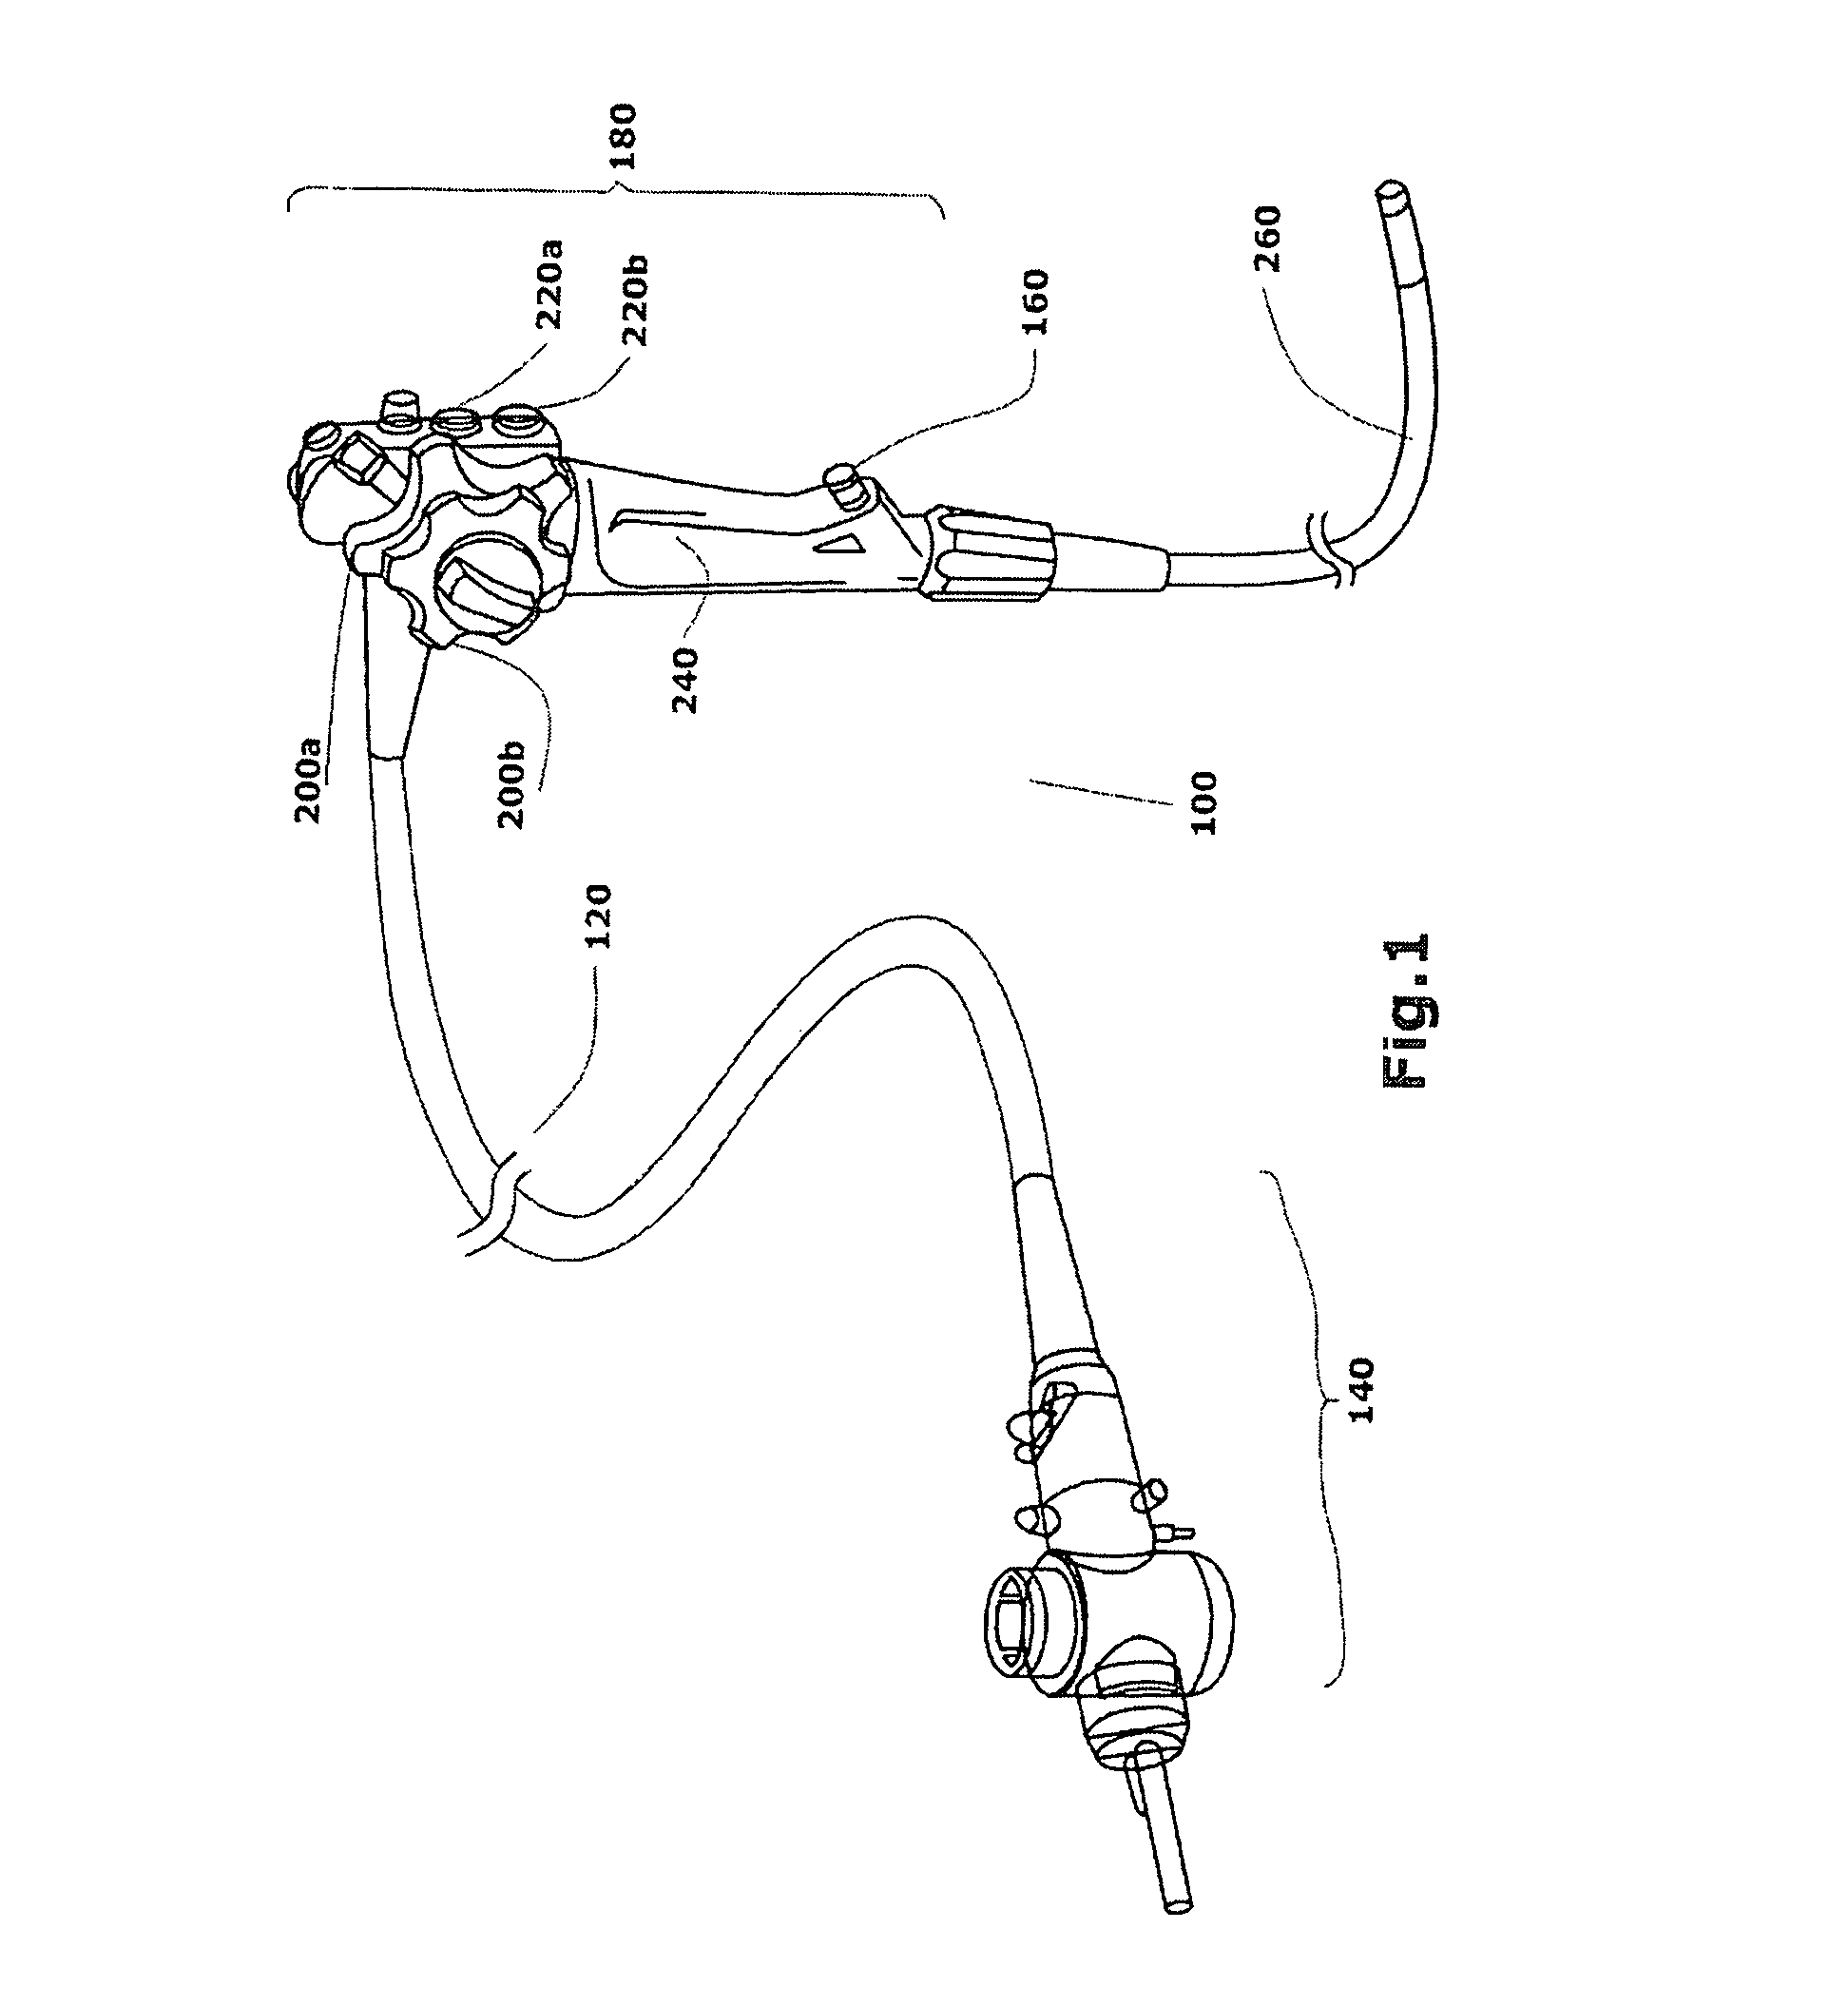 Endoscope hand assist device